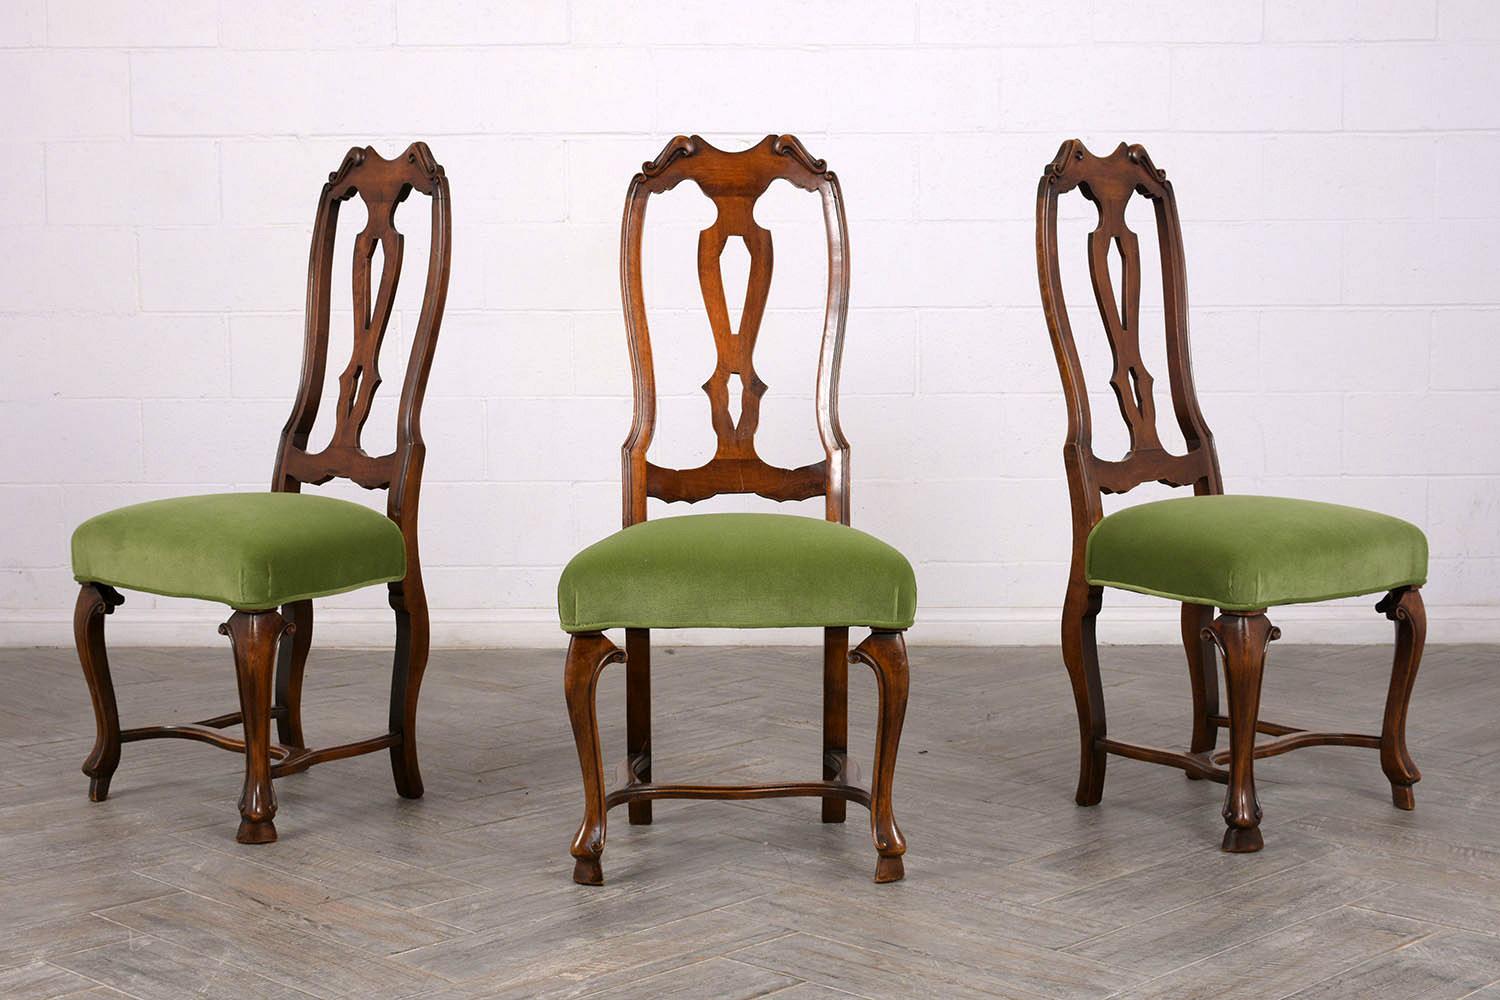 Hand-Carved Set of Six Restored English Regency Style Dining Chairs